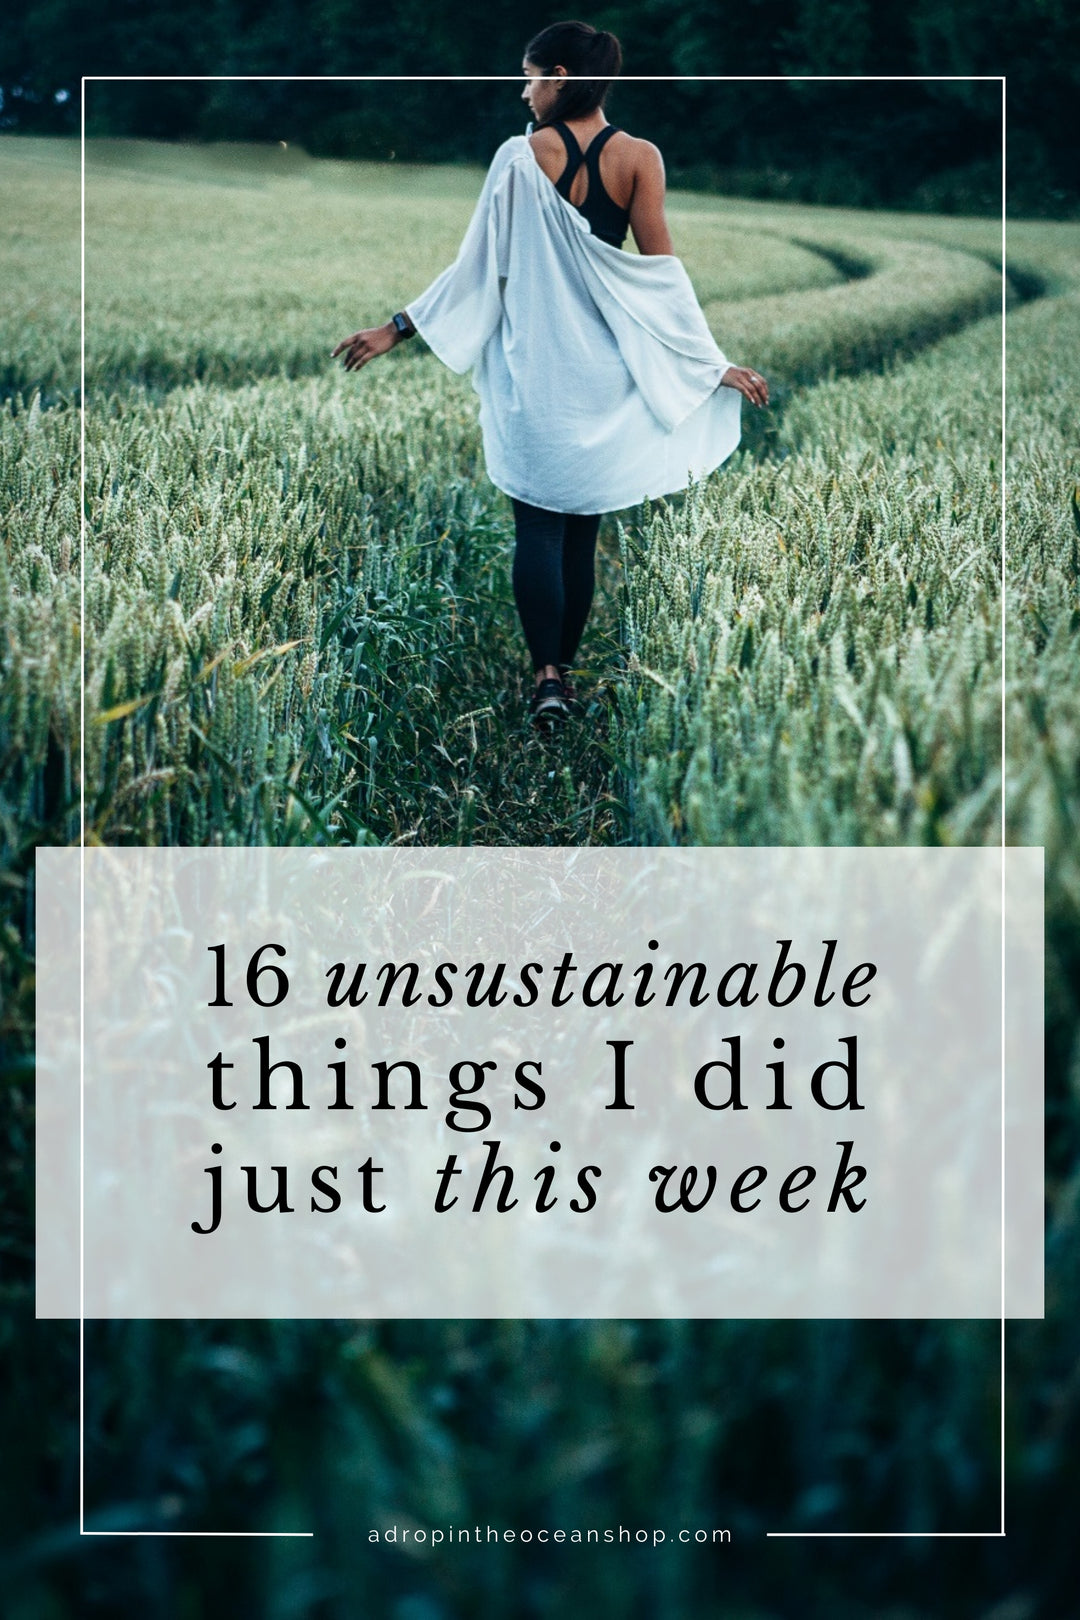 A Drop in the Ocean Zero Waste Blog: 16 Unsustainable Things I Did This Week